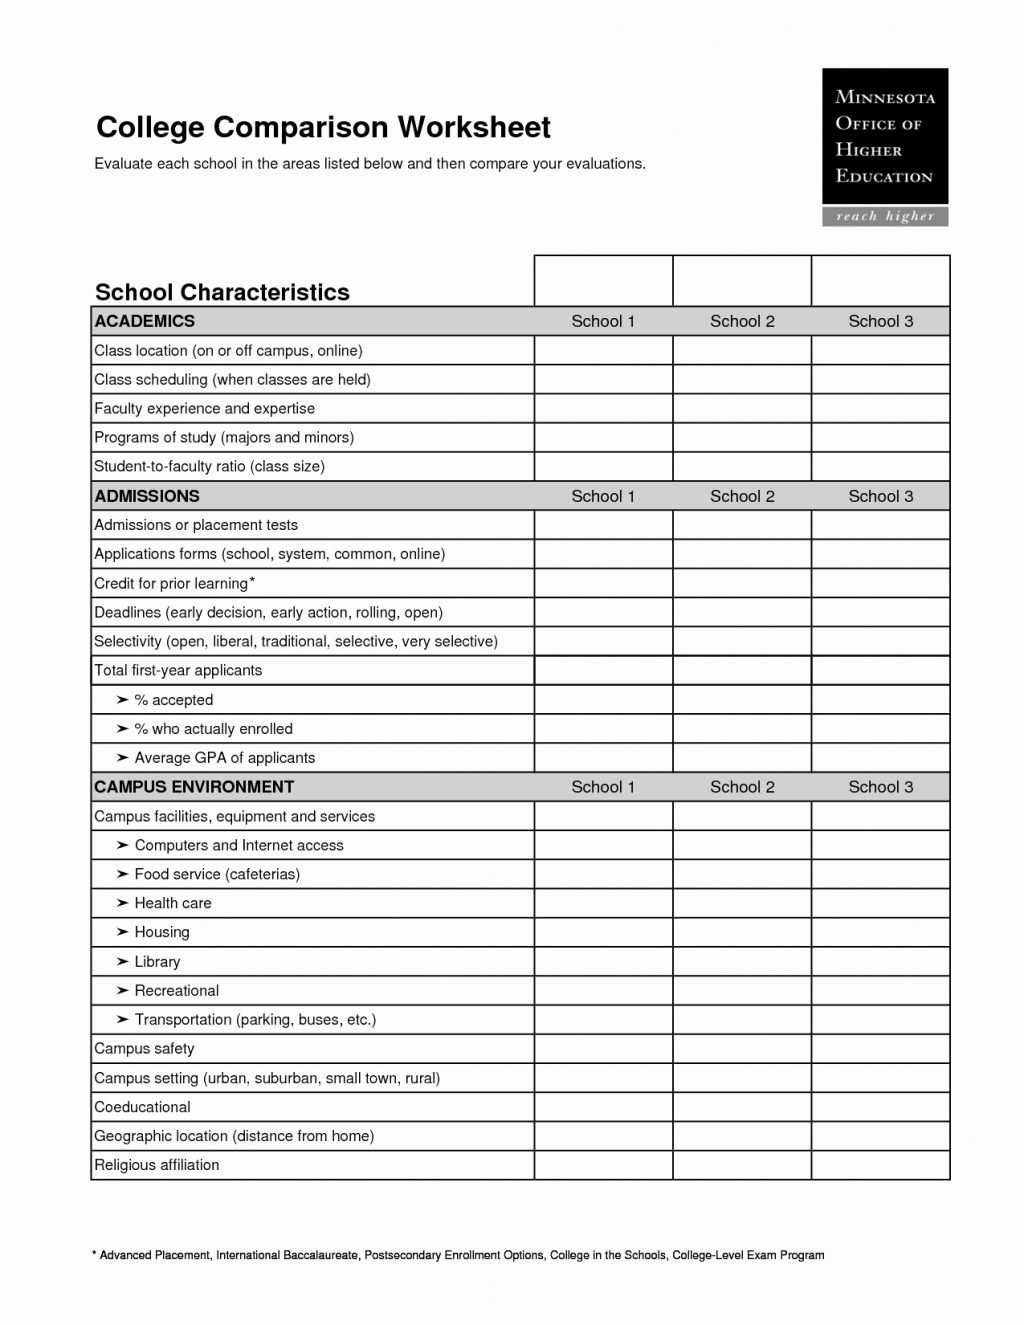 College Omparison Spreadsheet Ost Template Templates Sample Tuition With Regard To College Cost Comparison Worksheet